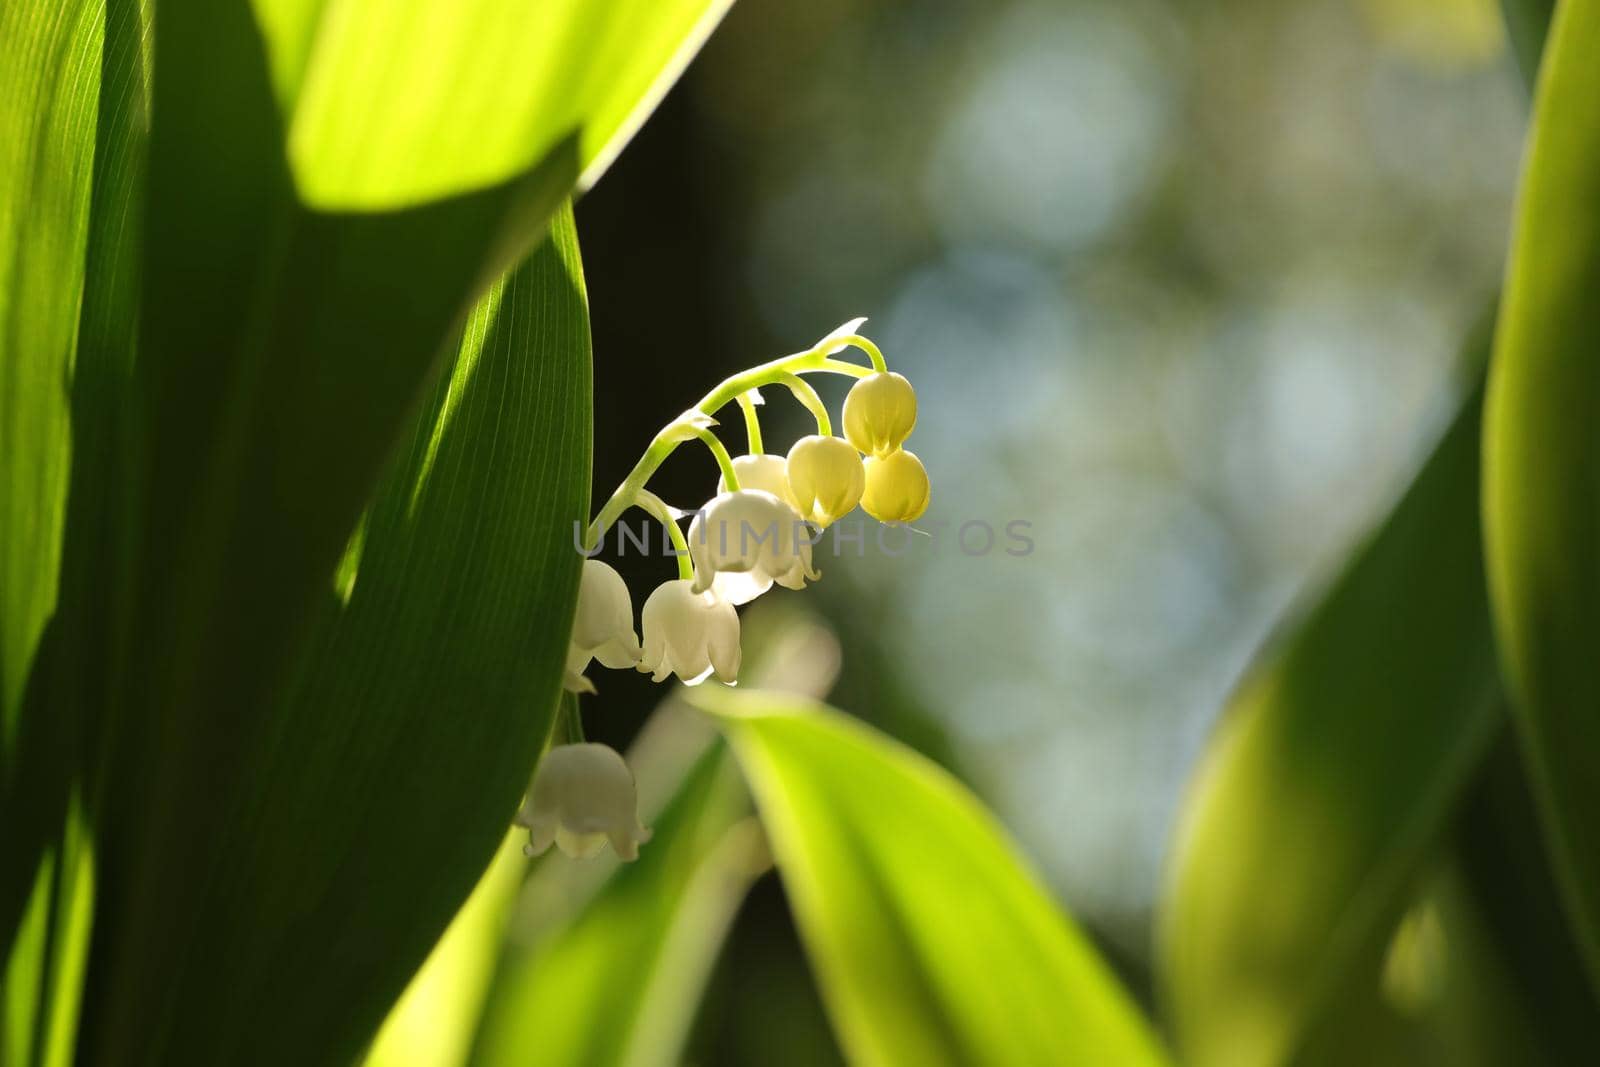 Lily of the valley in the forest.